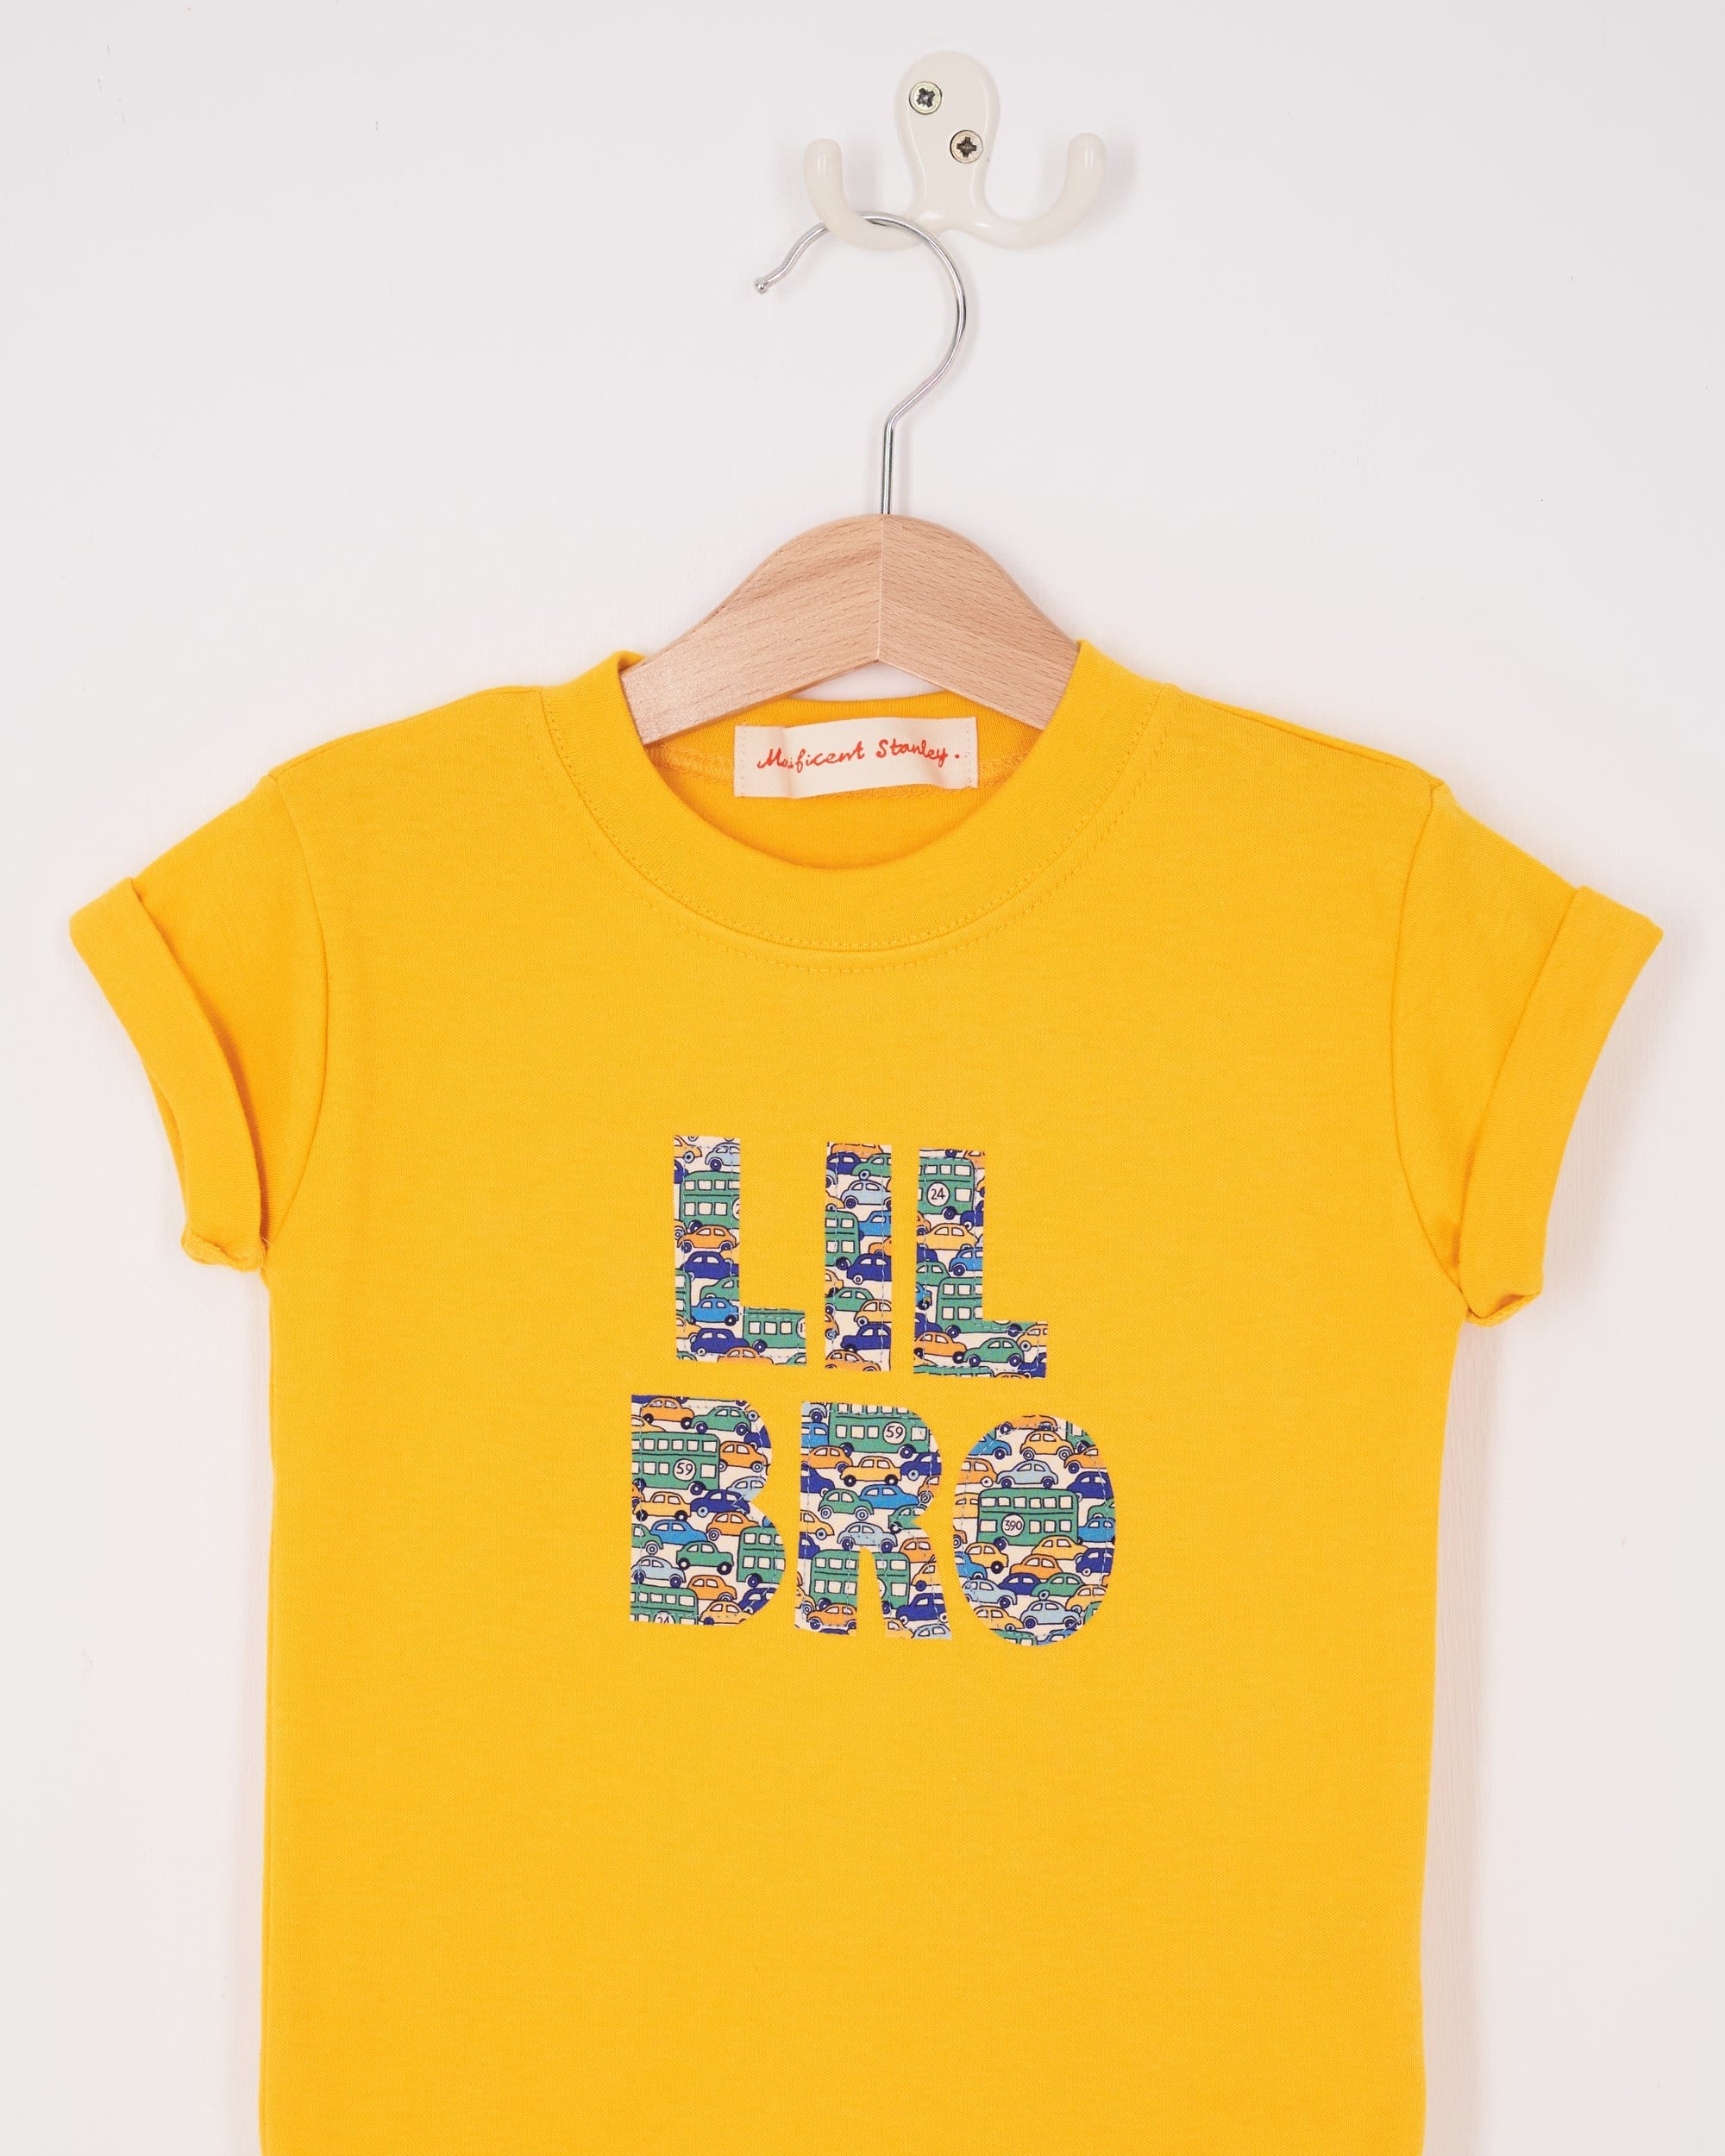 Magnificent Stanley Tee LIL' BRO Yellow T-Shirt in Choice of Liberty Print